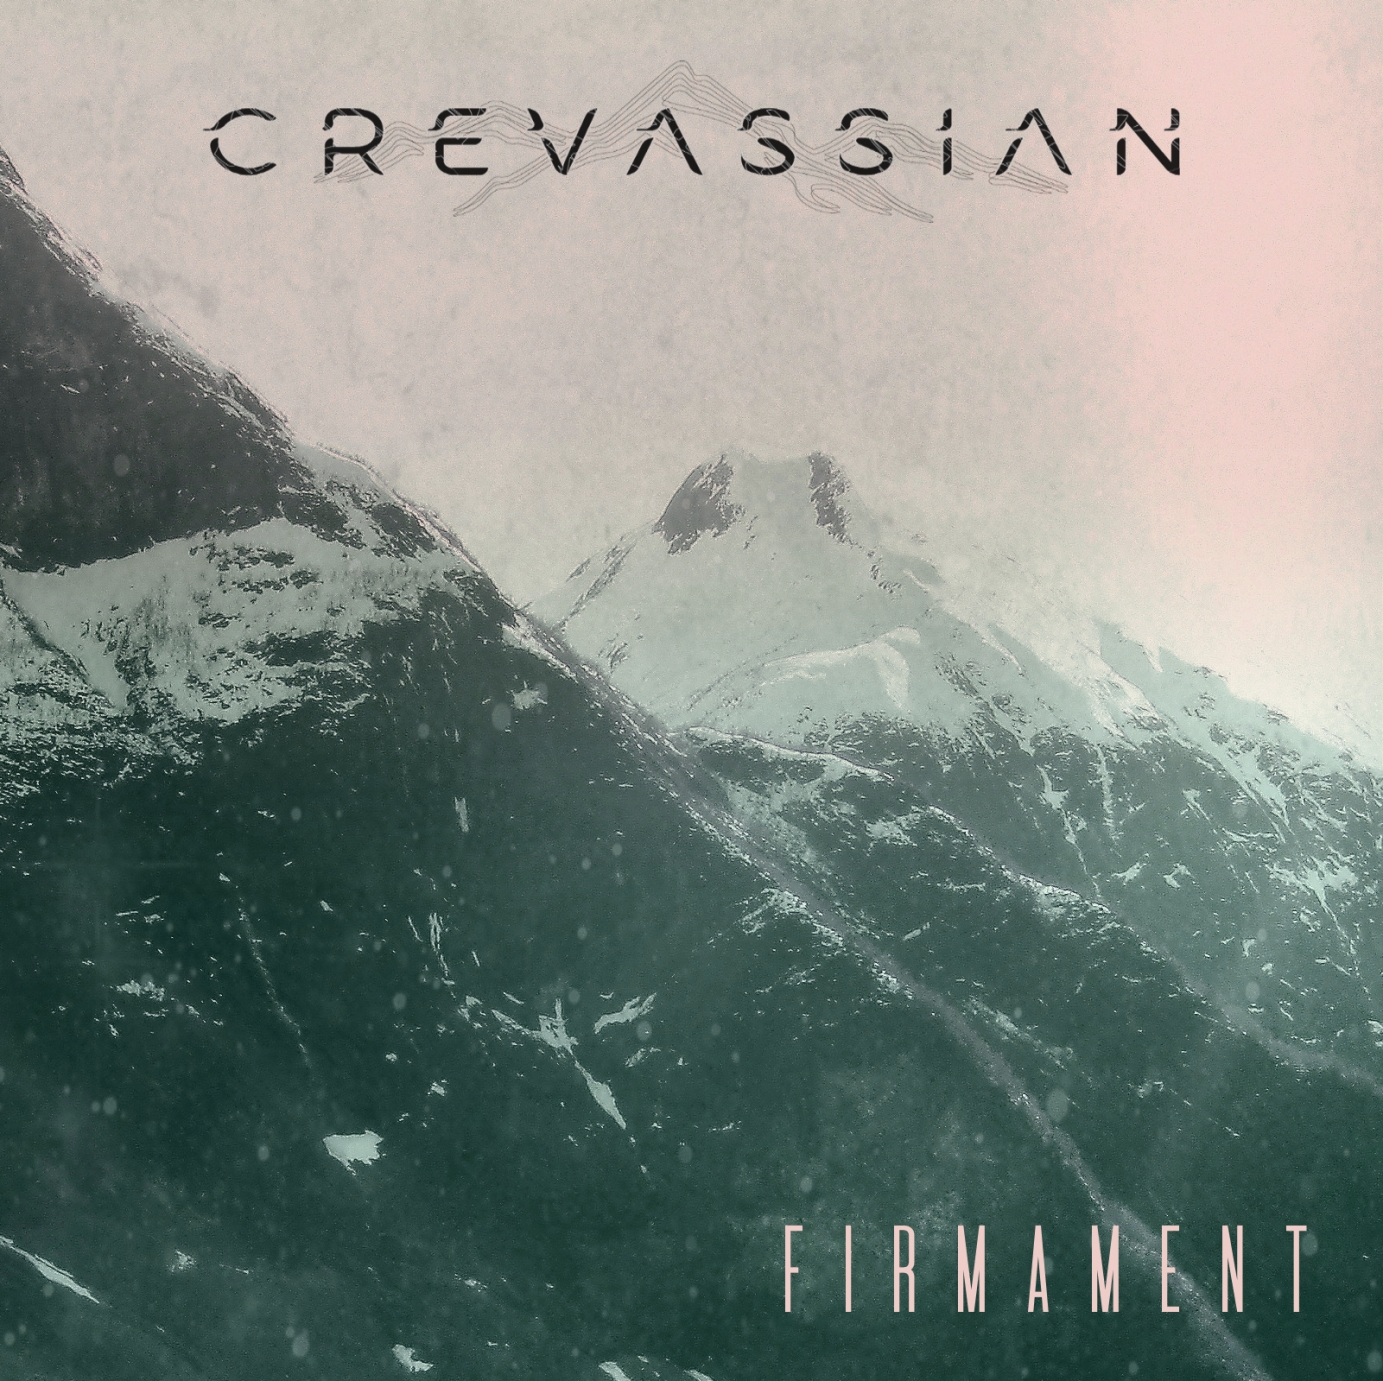 Artwork for Crevassian by nickpoveycollage